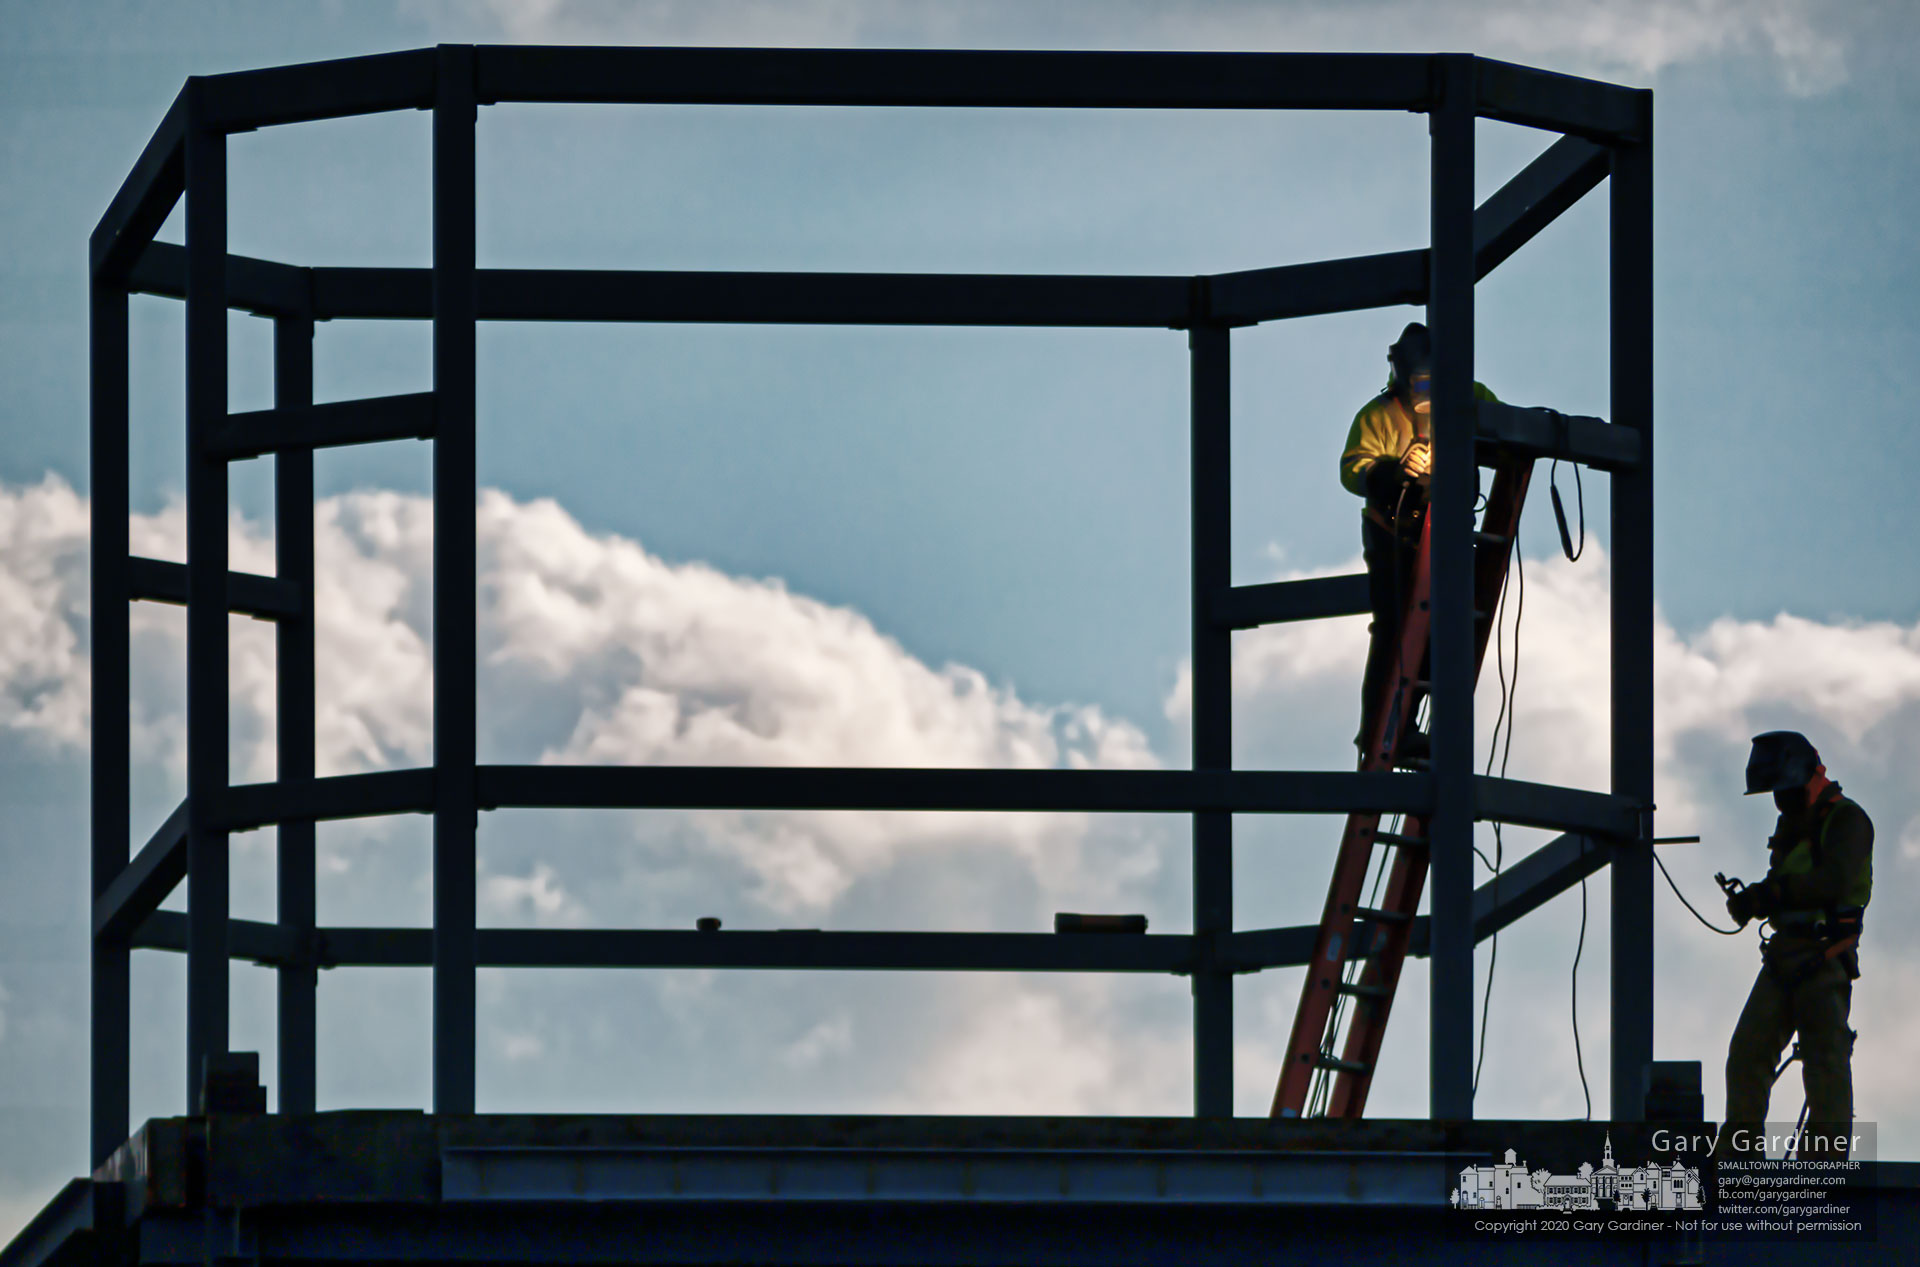 A welder is illuminated by the light from work building a section of the roof structure for a commercial building on Polaris Parkway. My Final Photo for Jan. 16, 2020.